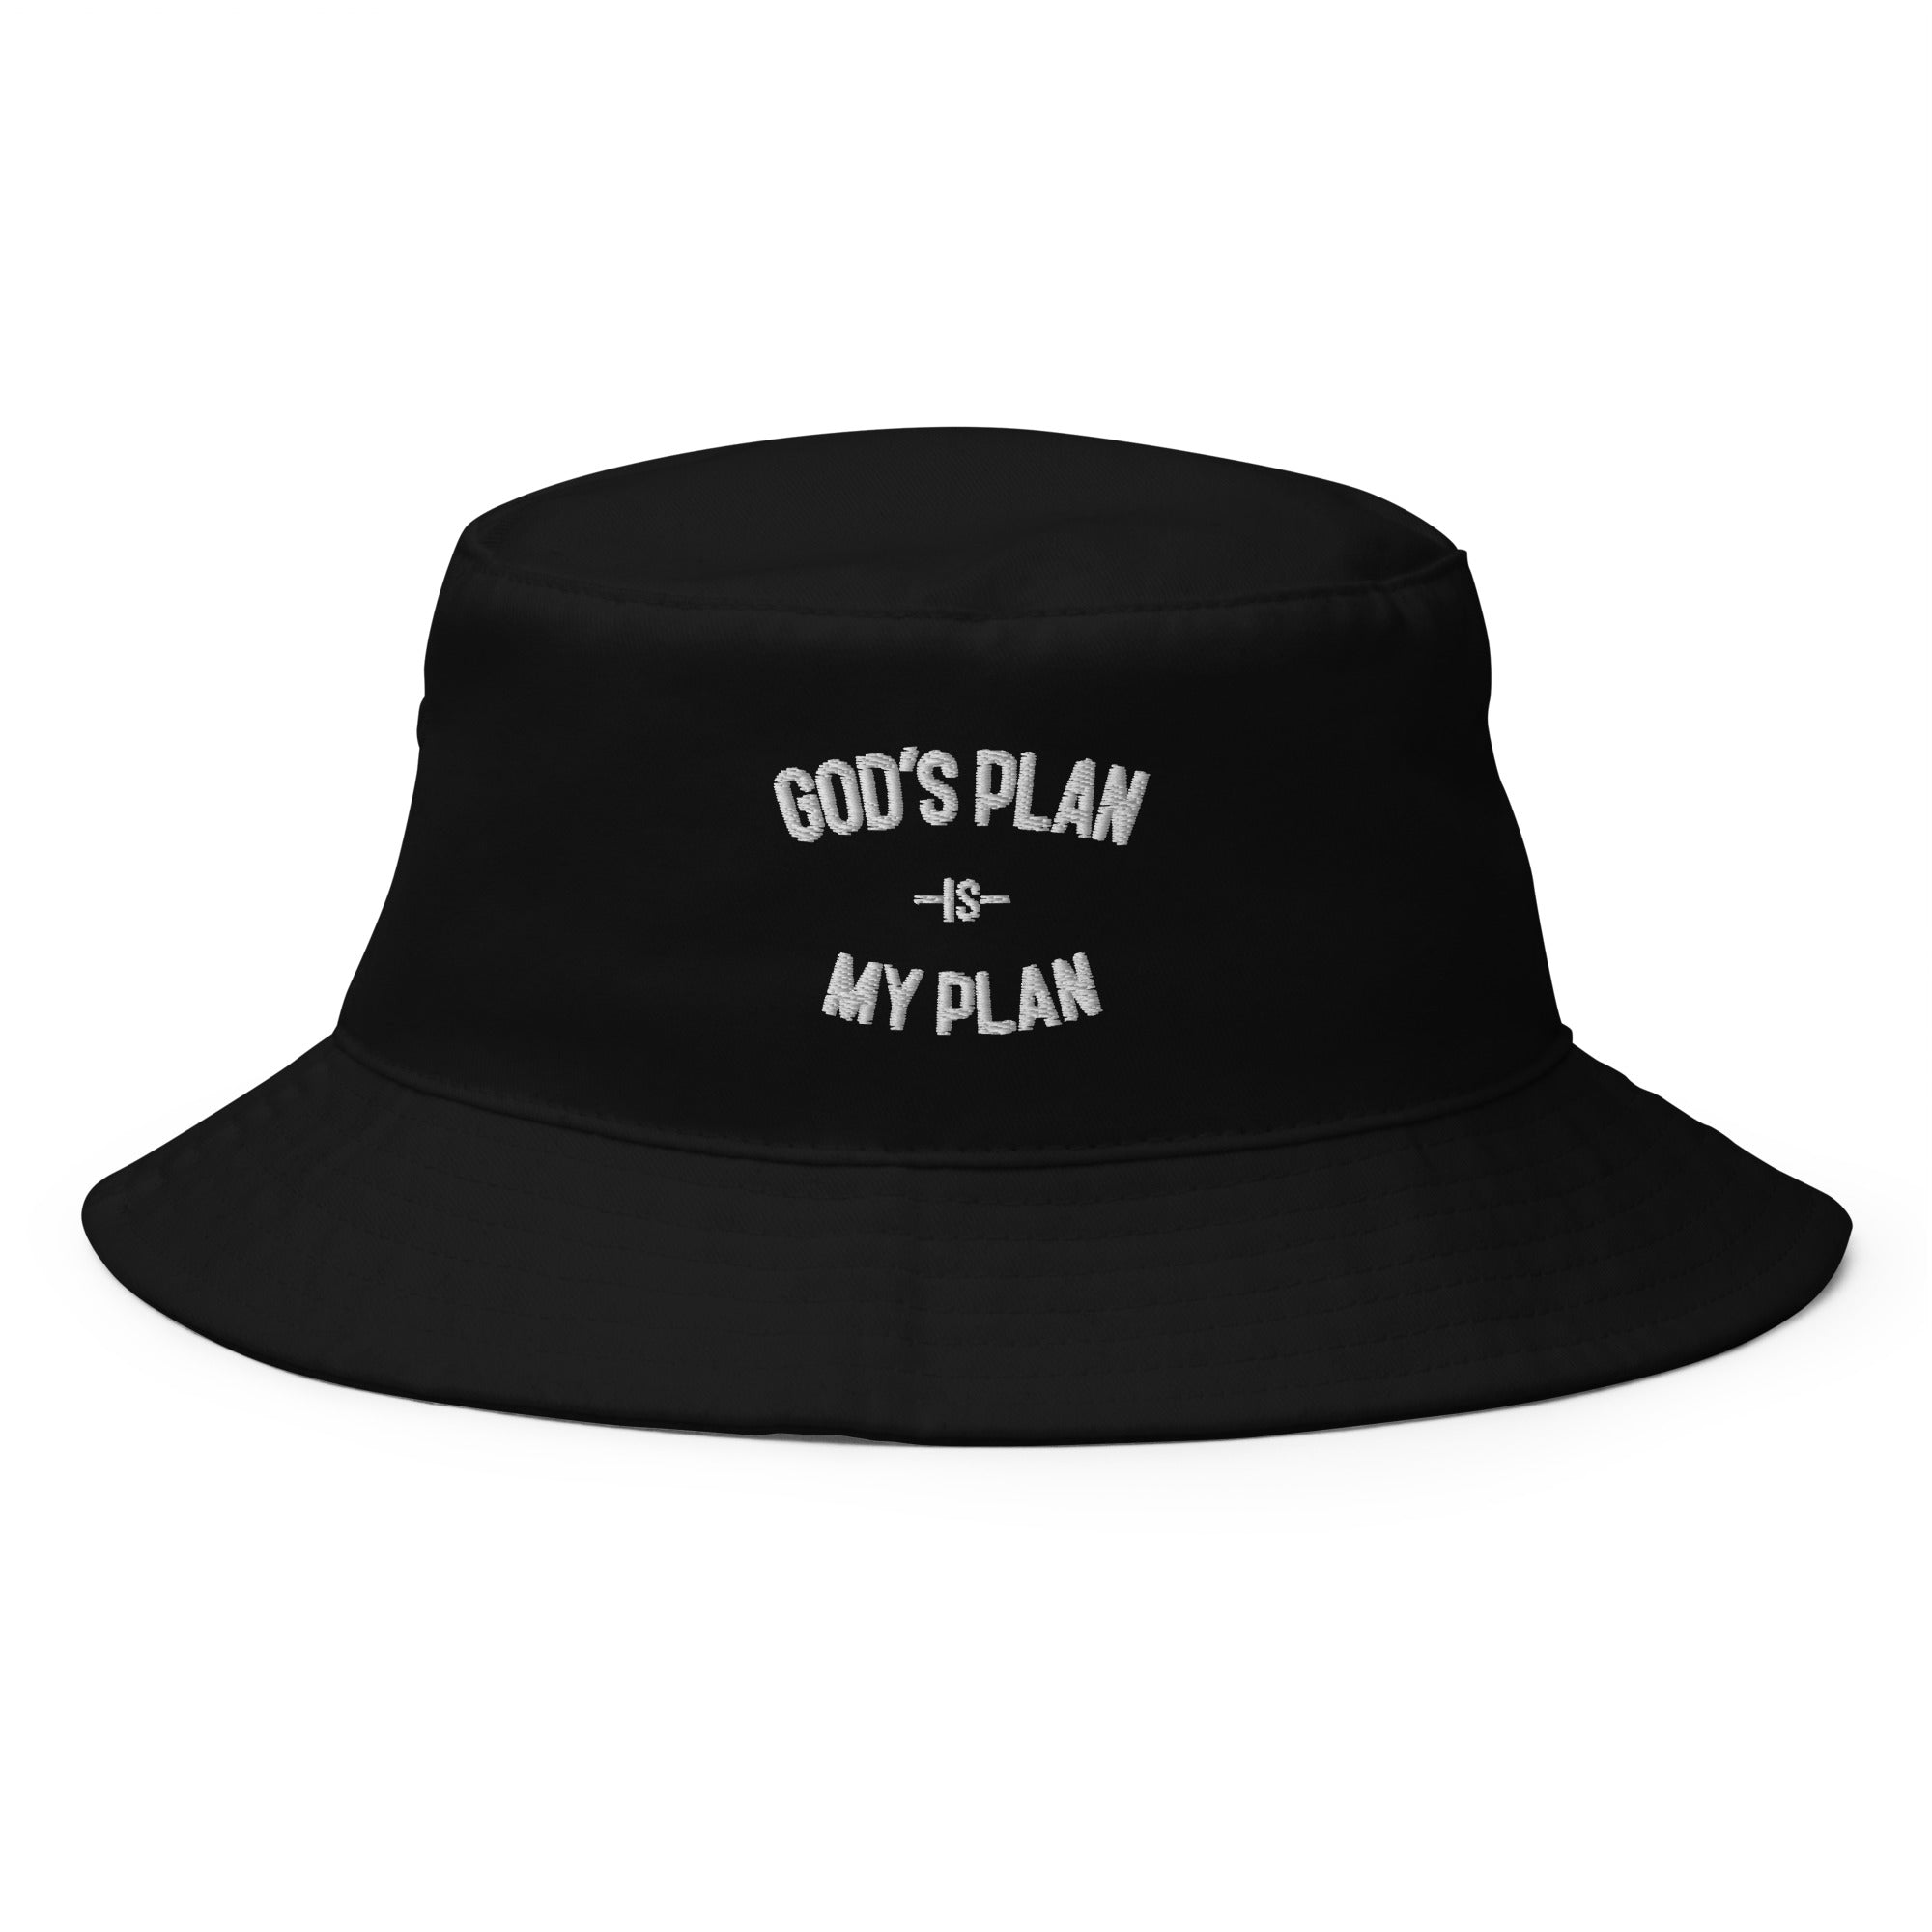 God's Plan My Plan Original Bucket Hat, Used By God, Used By God Clothing, Christian Apparel, Christian Hats, Christian T-Shirts, Christian Clothing, God Shirts, Christian Sweatshirts, God Clothing, Jesus Hoodie, Jesus Clothes, God Is Dope, Art Of Homage, Red Letter Clothing, Elevated Faith, Active Faith Sports, Beacon Threads, God The Father Apparel